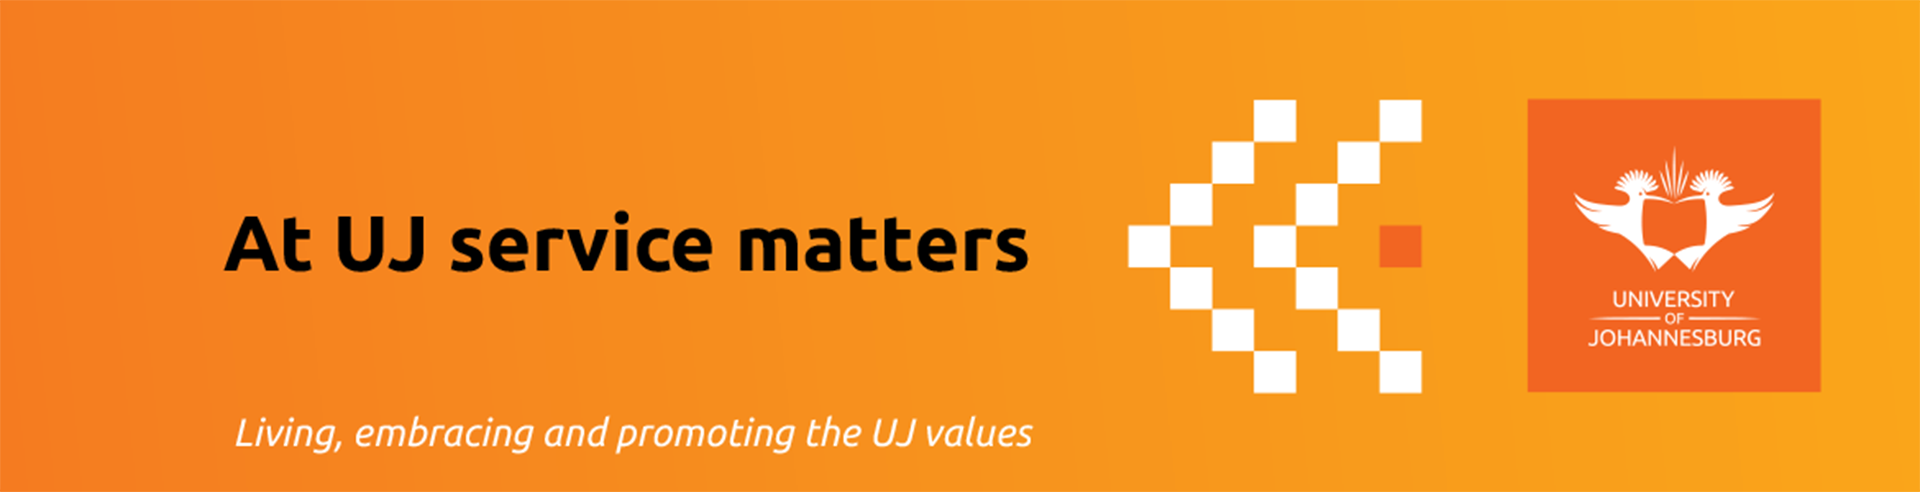 Uj Values Expressions Posters 2020 Ulink 1170x300mm 22